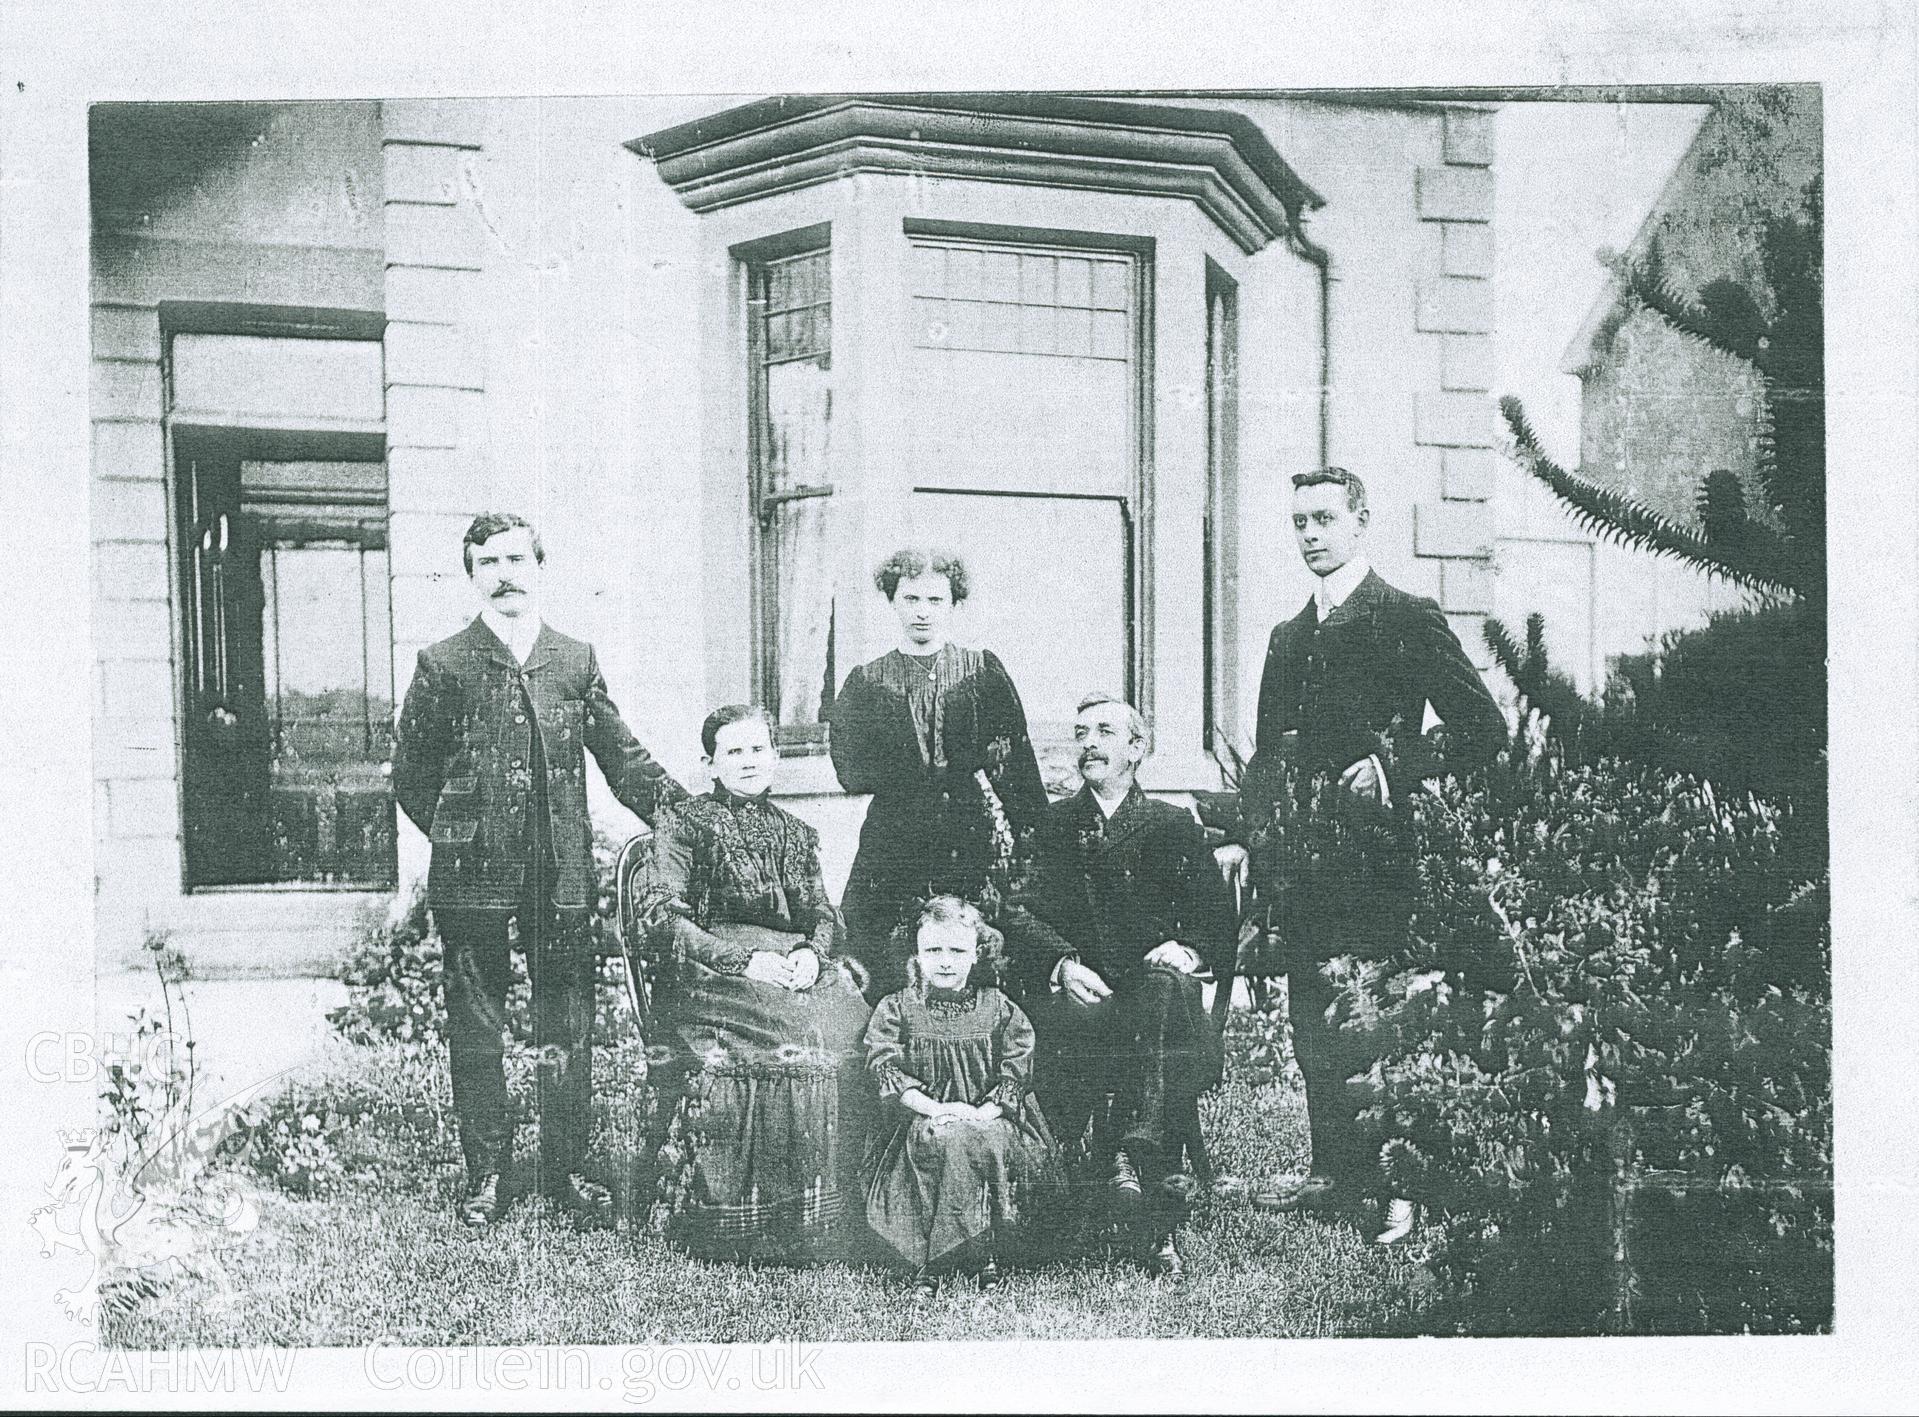 Black and white photograph of Iorwerth Du and his family at 'Bethania View.' Donated to the RCAHMW by Cyril Philips as part of the Digital Dissent Project.